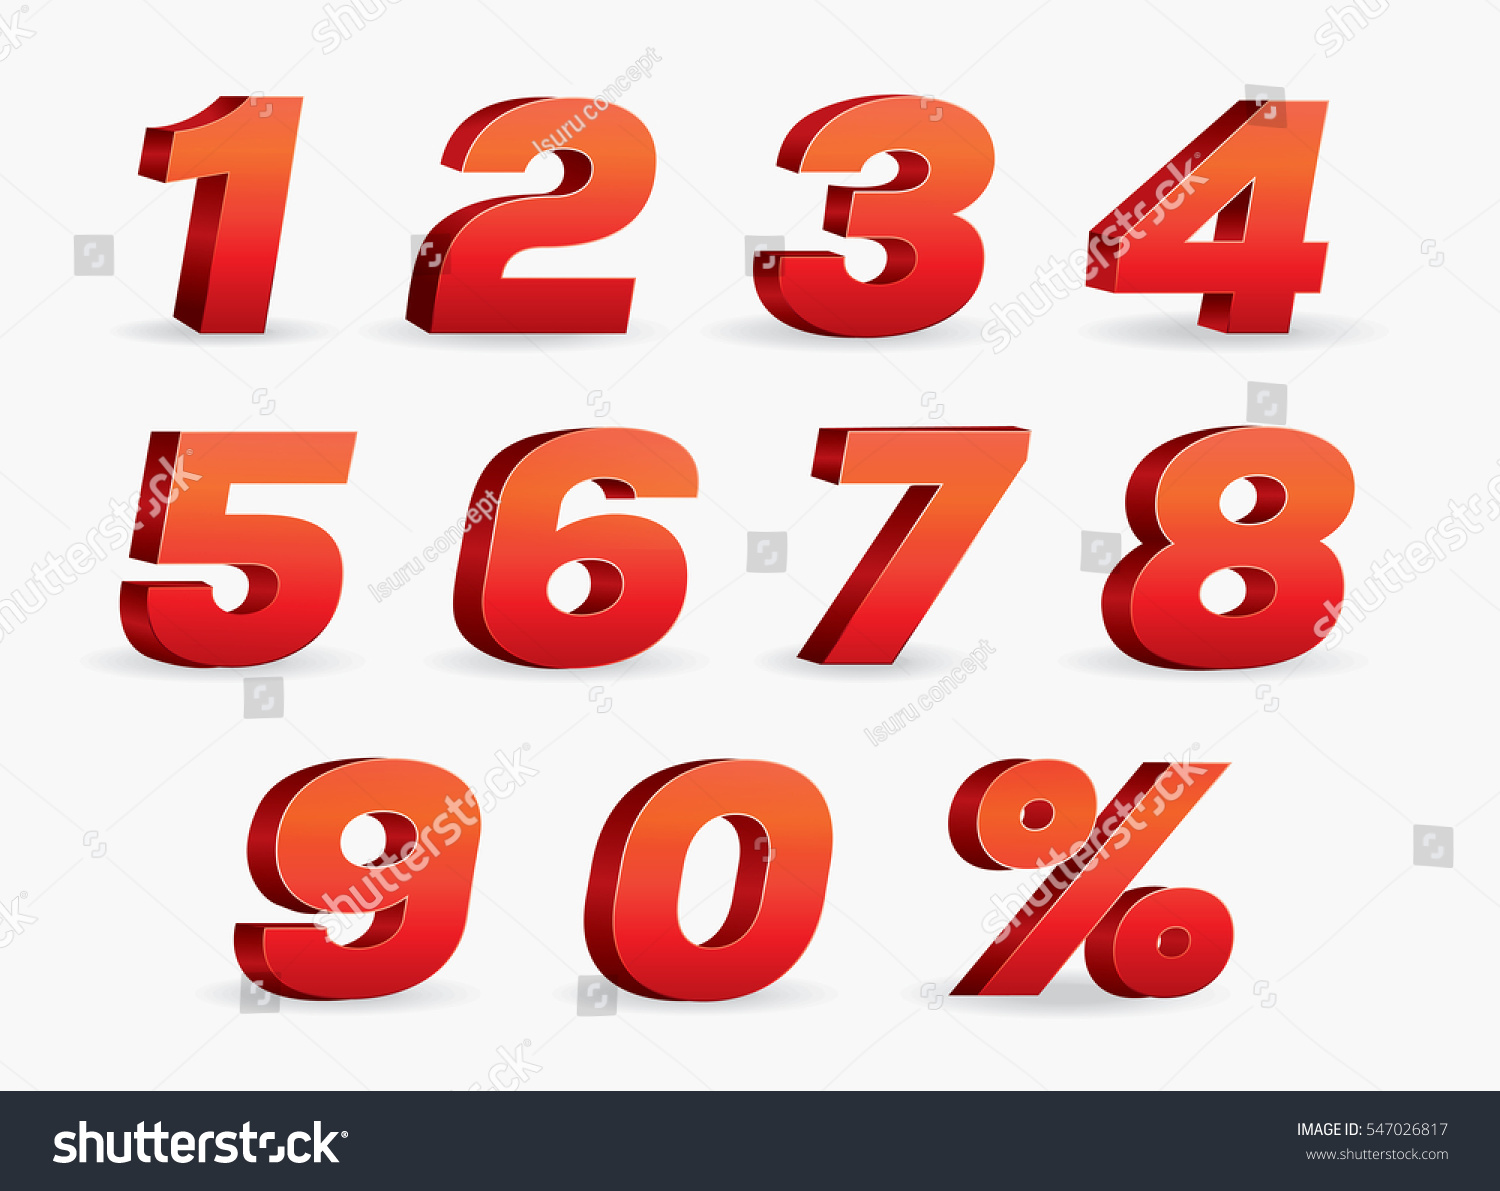 3D Vector  0, 1, 2, 3, 4, 5, 6, 7, 8, 9 Red color  numeral alphabet.  #547026817